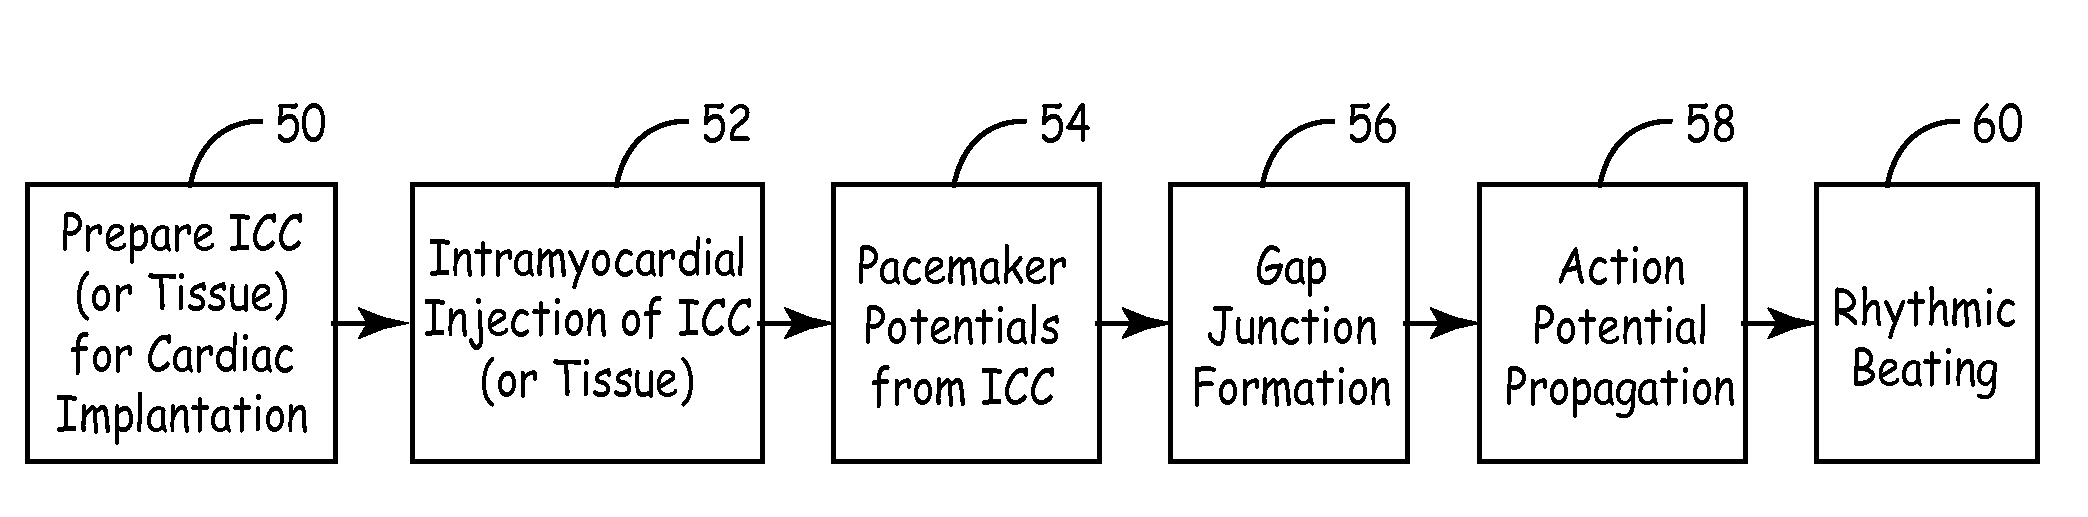 Biological pacemaker compositions and systems incorporating interstitial cells of Cajal